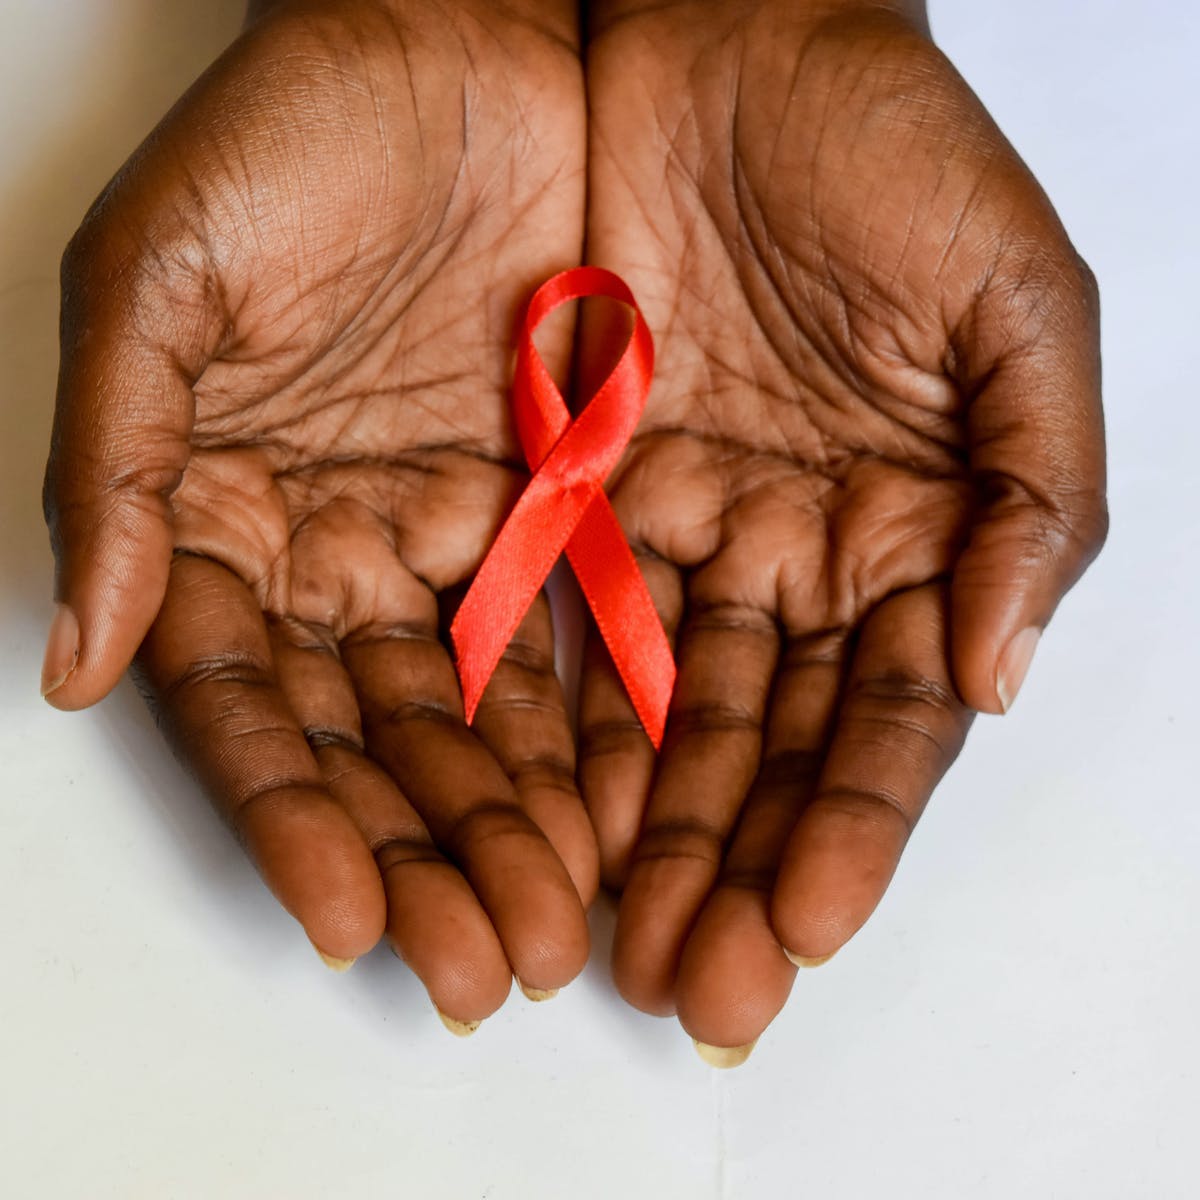 The High Risk of Gay Black Men Getting HIV